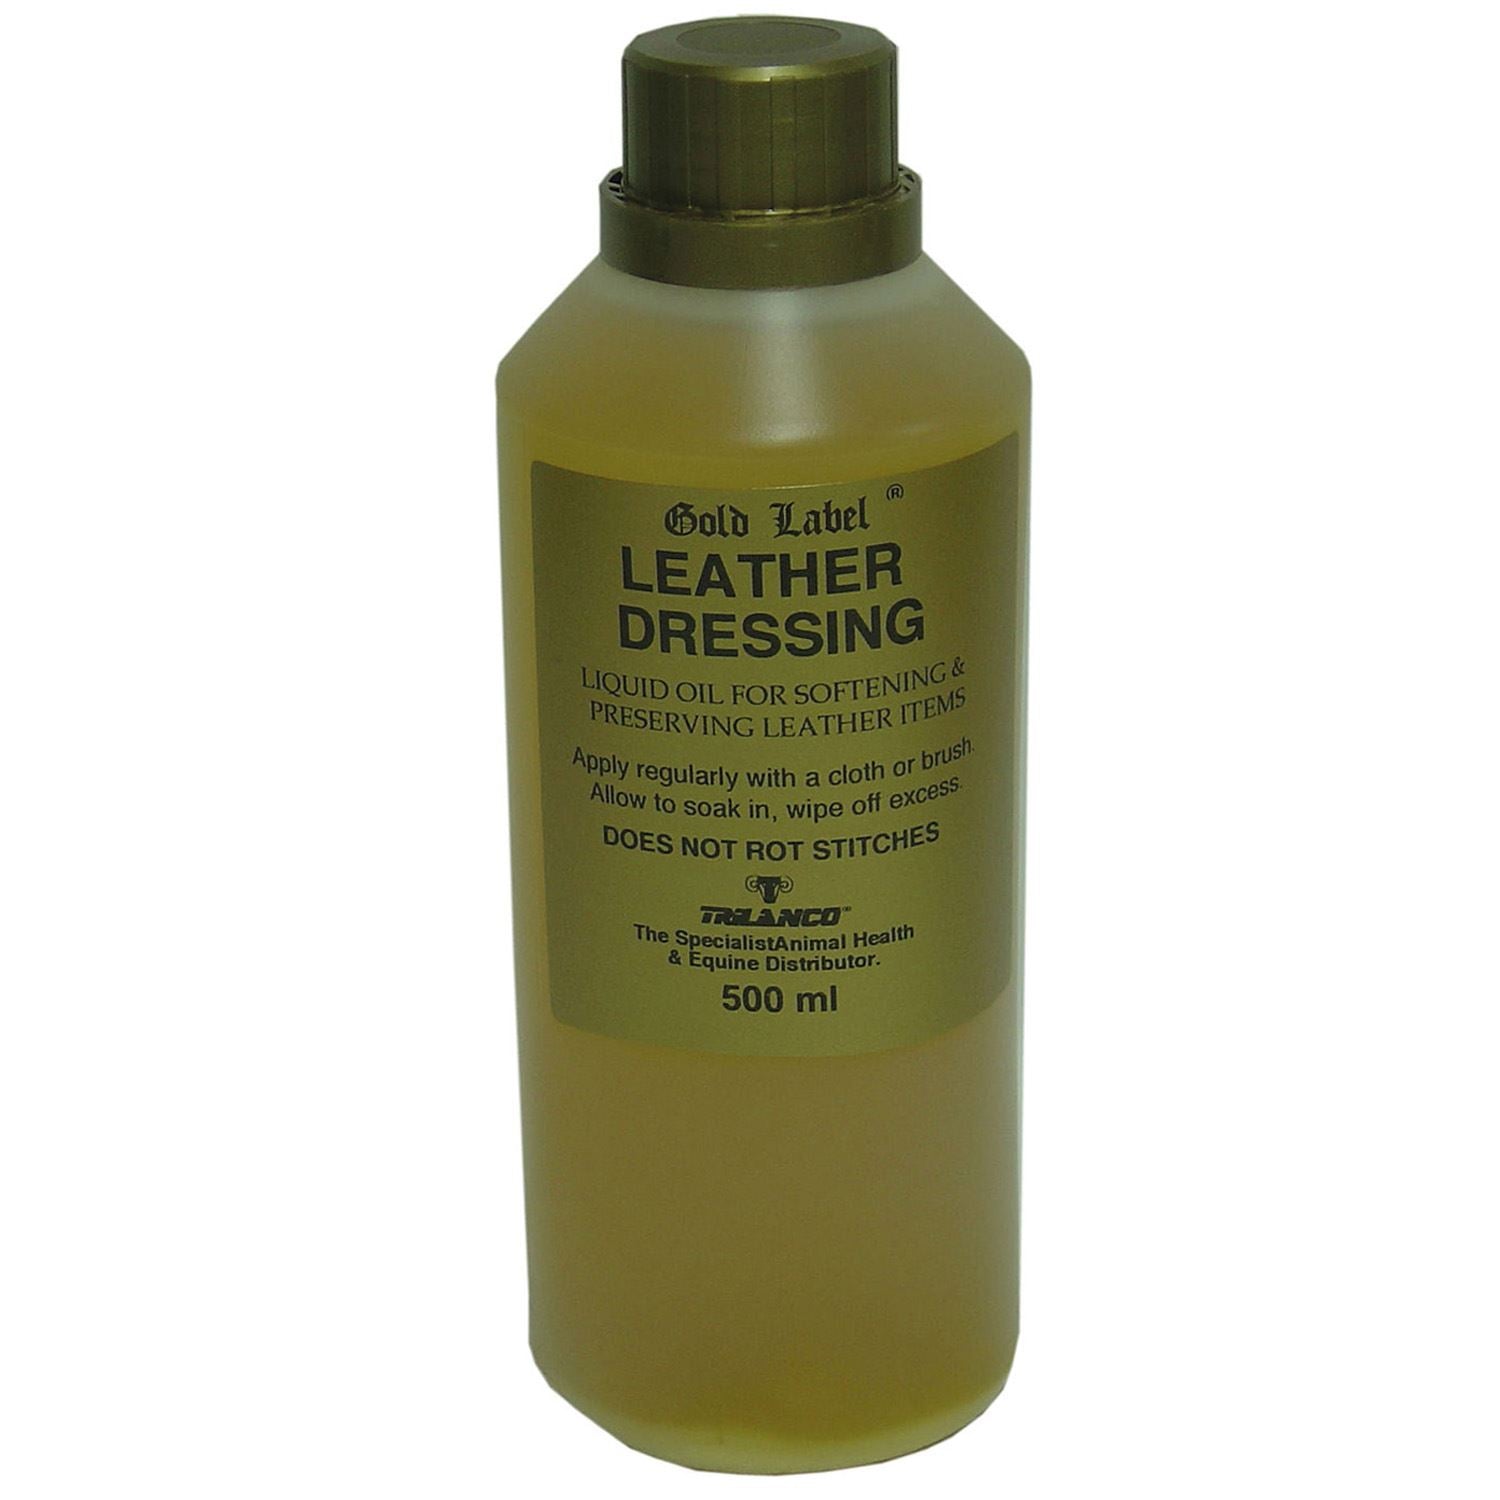 Gold Label Leather Dressing - Just Horse Riders